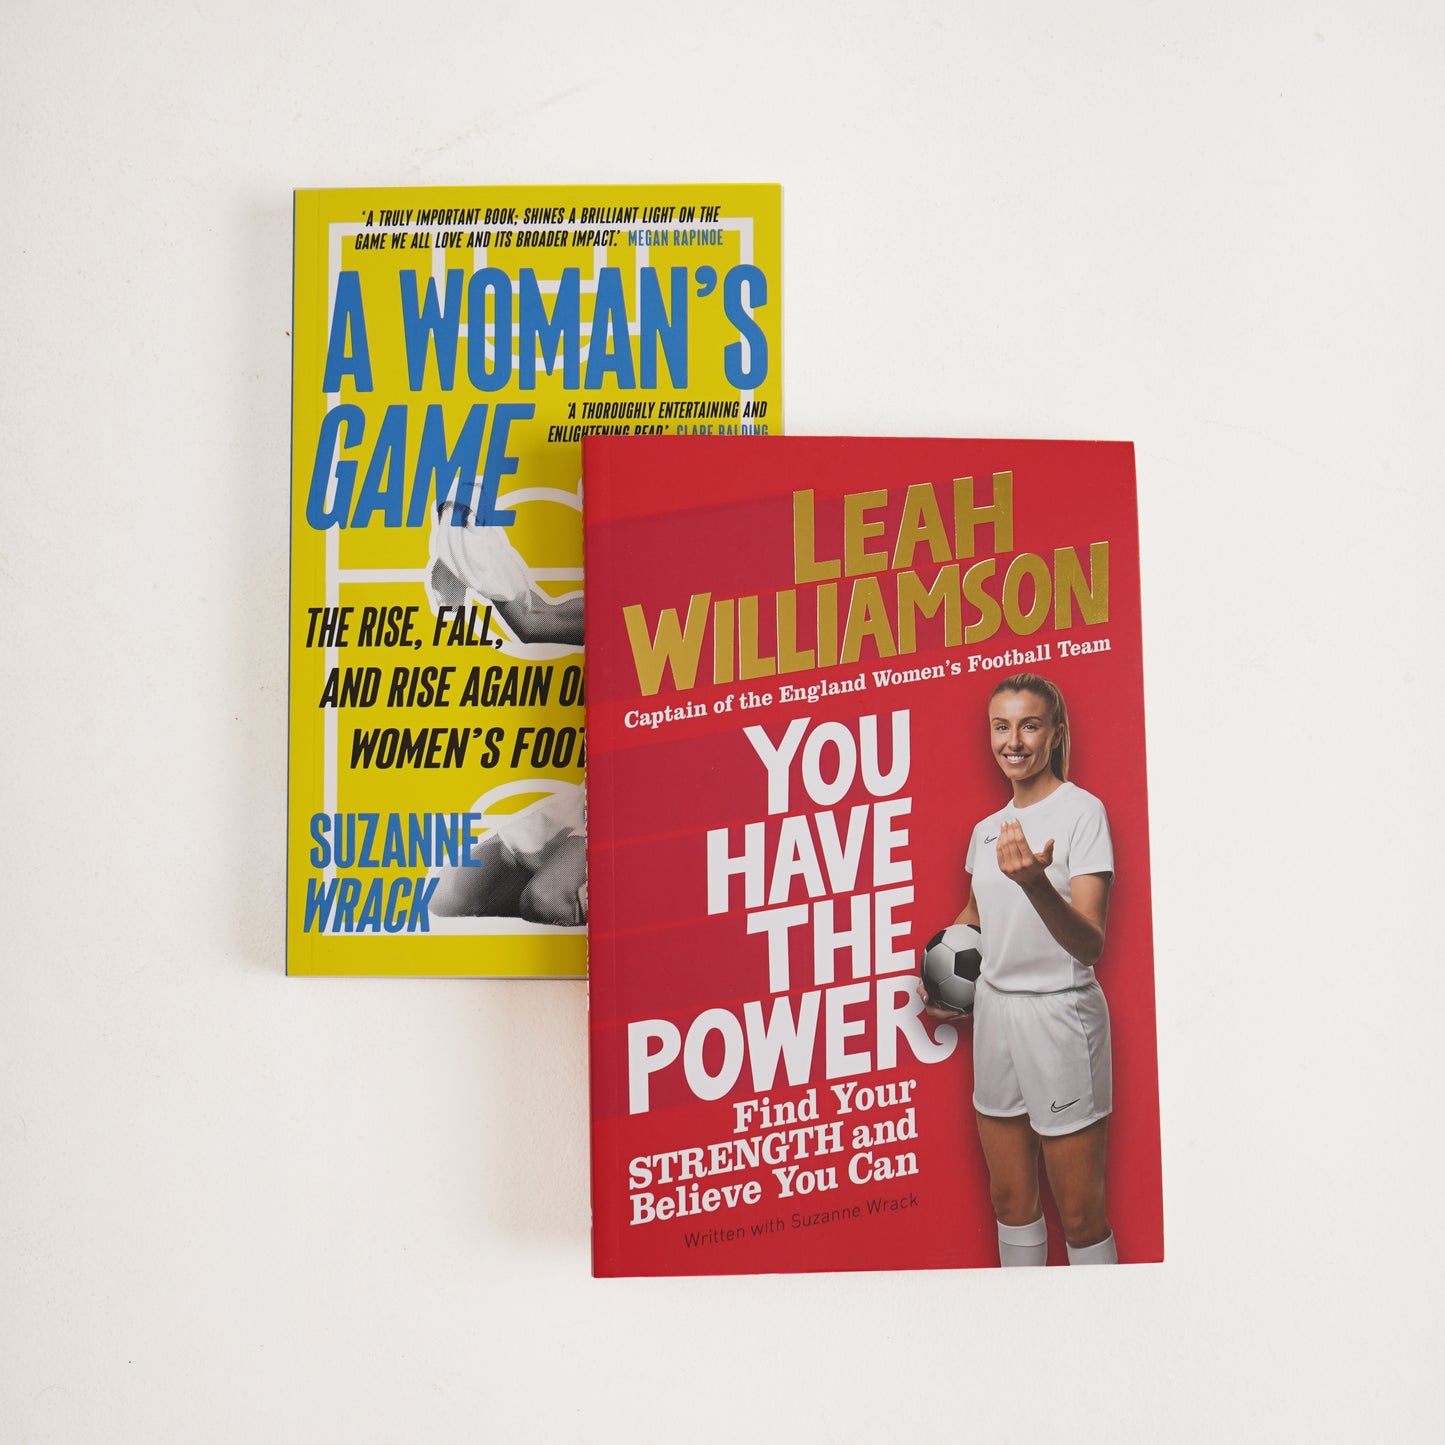 Suzanne Wrack Collection 2 Books Set (A Woman's Game, You Have the Power)